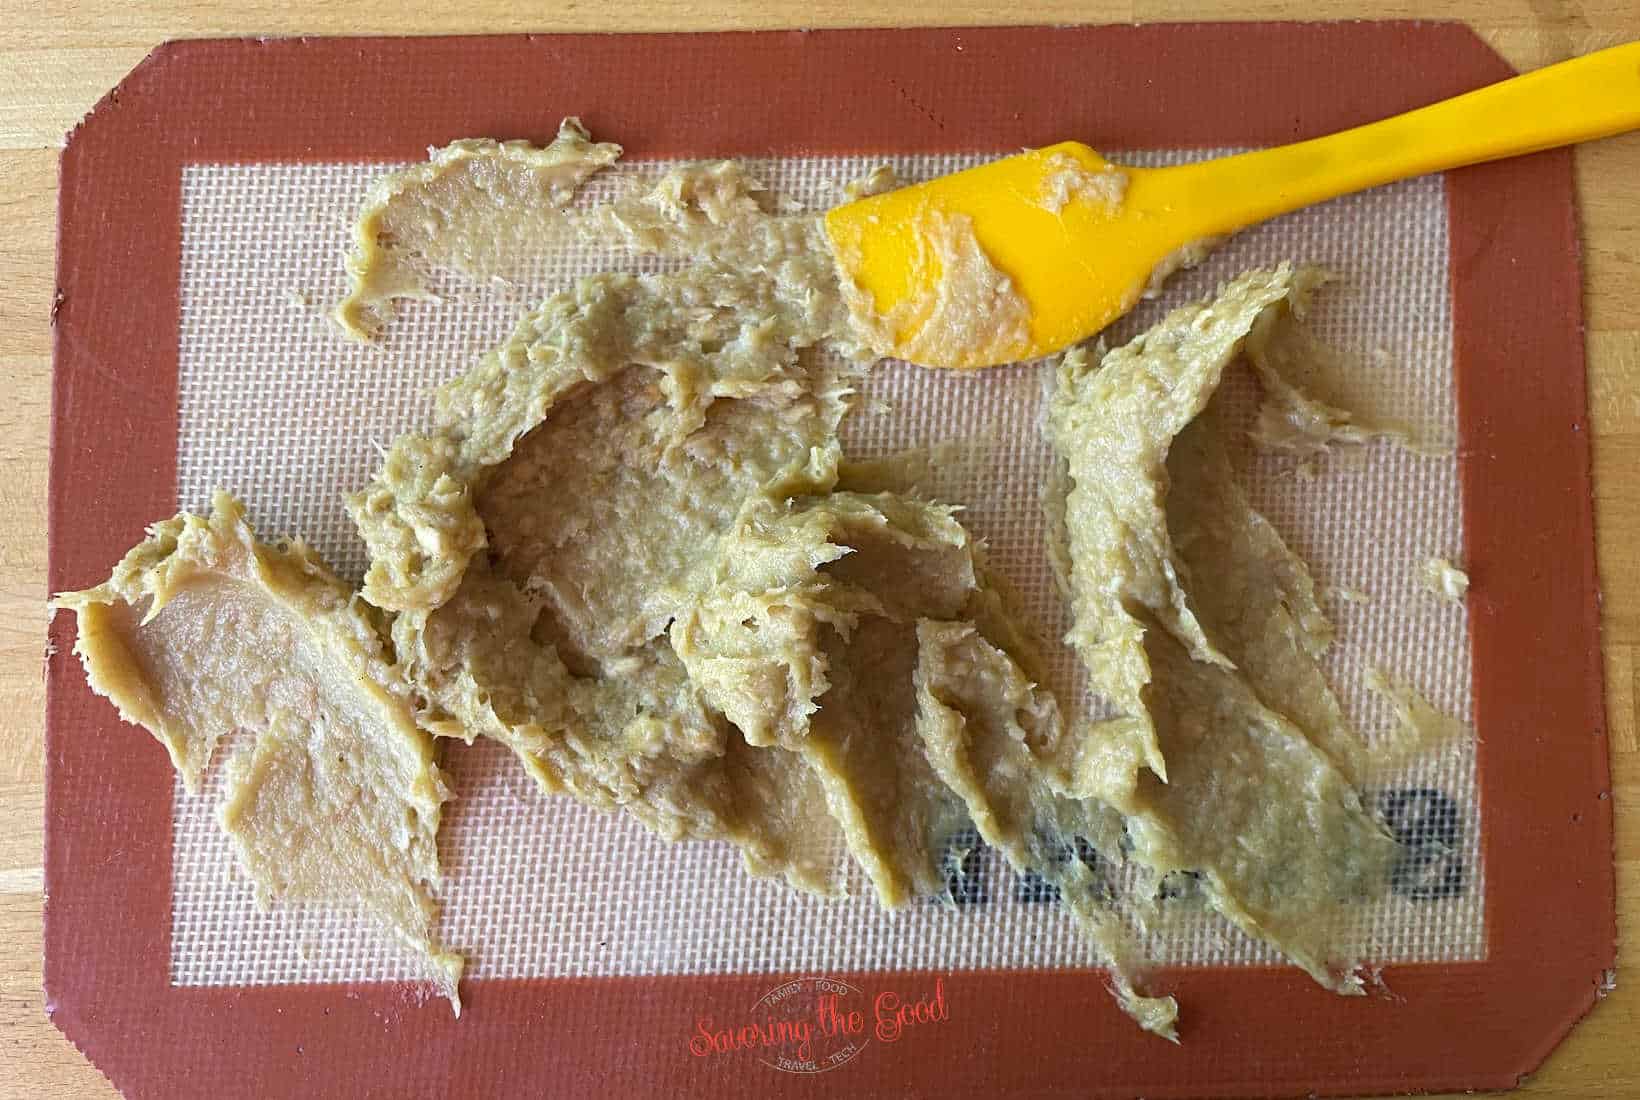 purred garlic paste being spread on a sil pat mat with a yellow spatula.